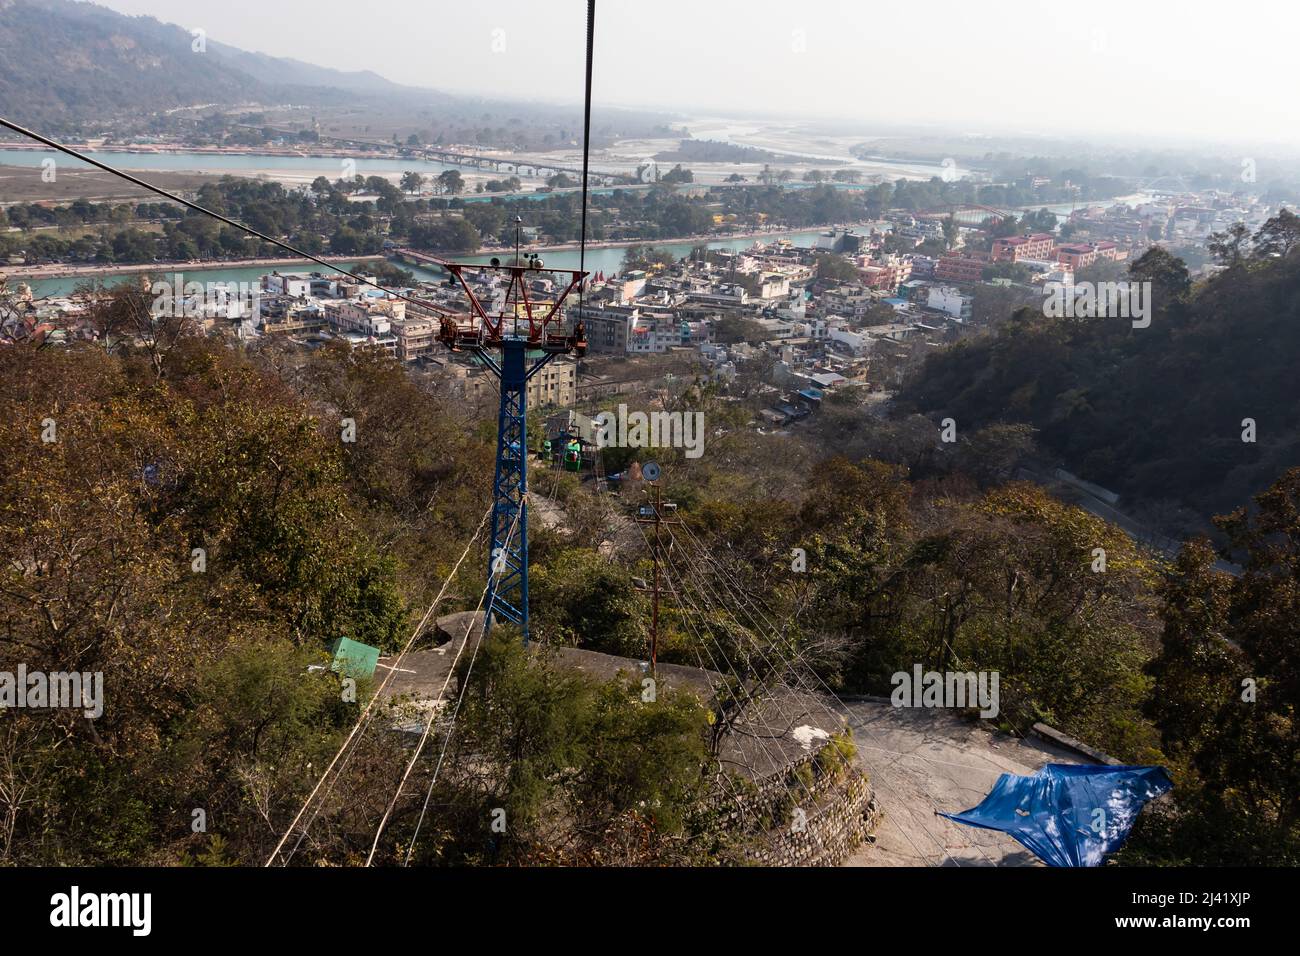 rope way with city view at day from top angle image is taken at Mansa Devi Temple rope way haridwar uttrakhand india. Stock Photo